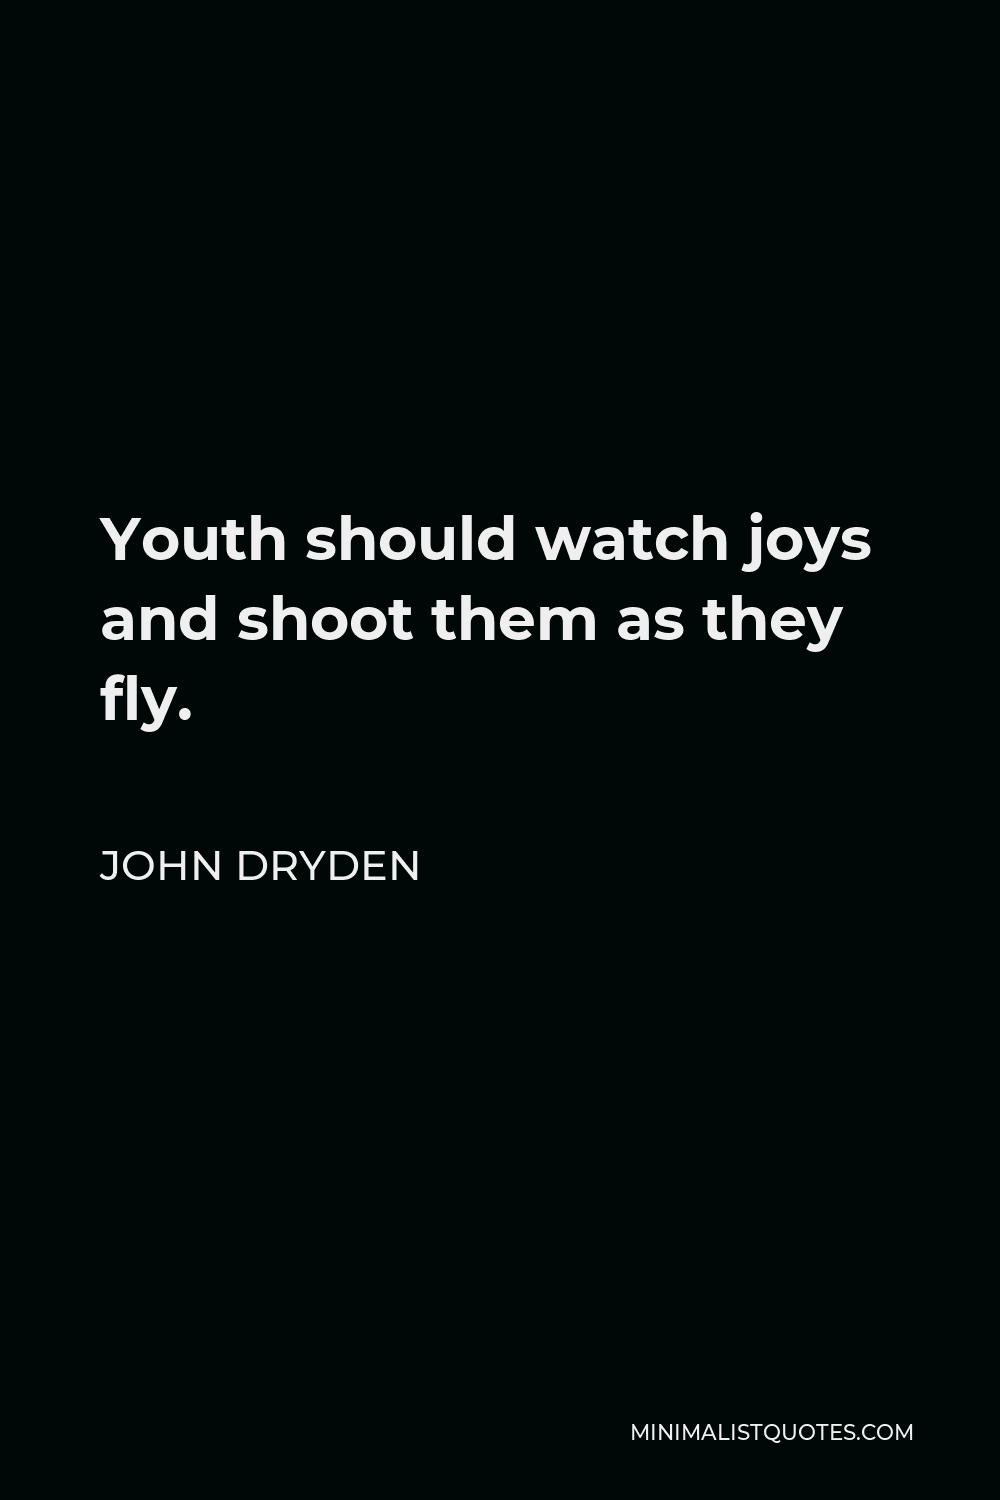 John Dryden Quote - Youth should watch joys and shoot them as they fly.